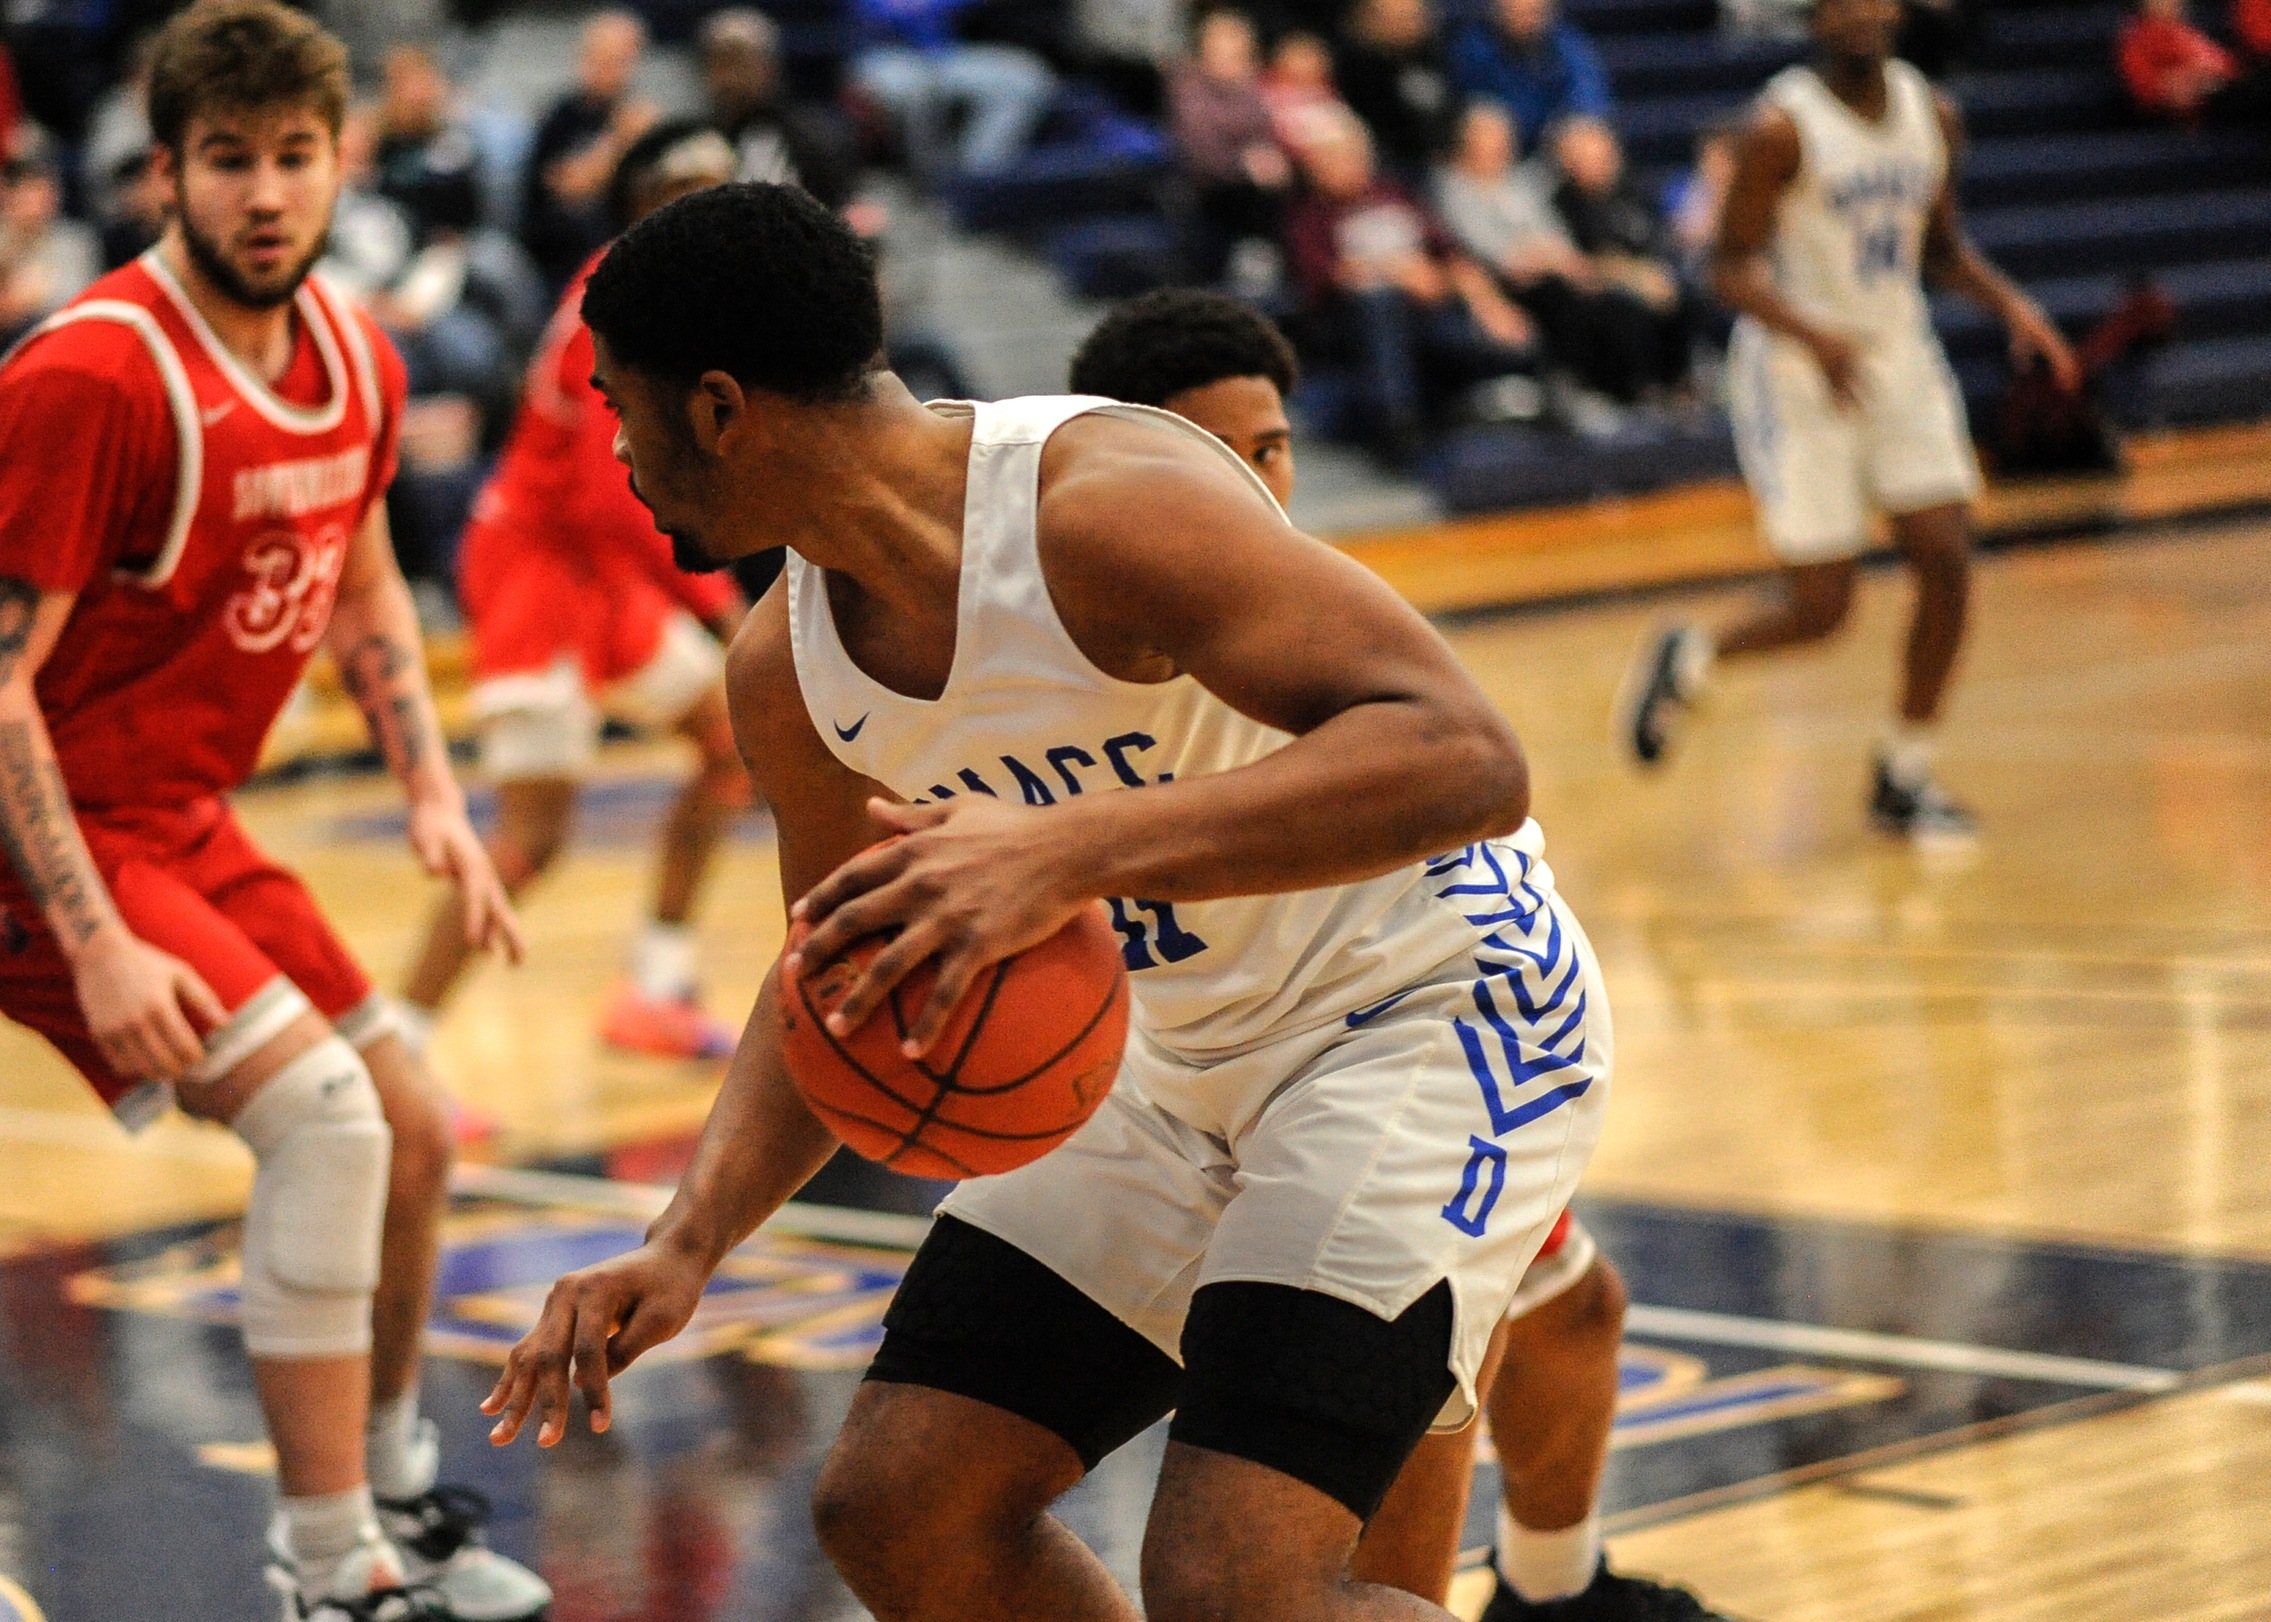 DMACC men's basketball team runs winning streak to 12 games with wins over SWCC and ILCC